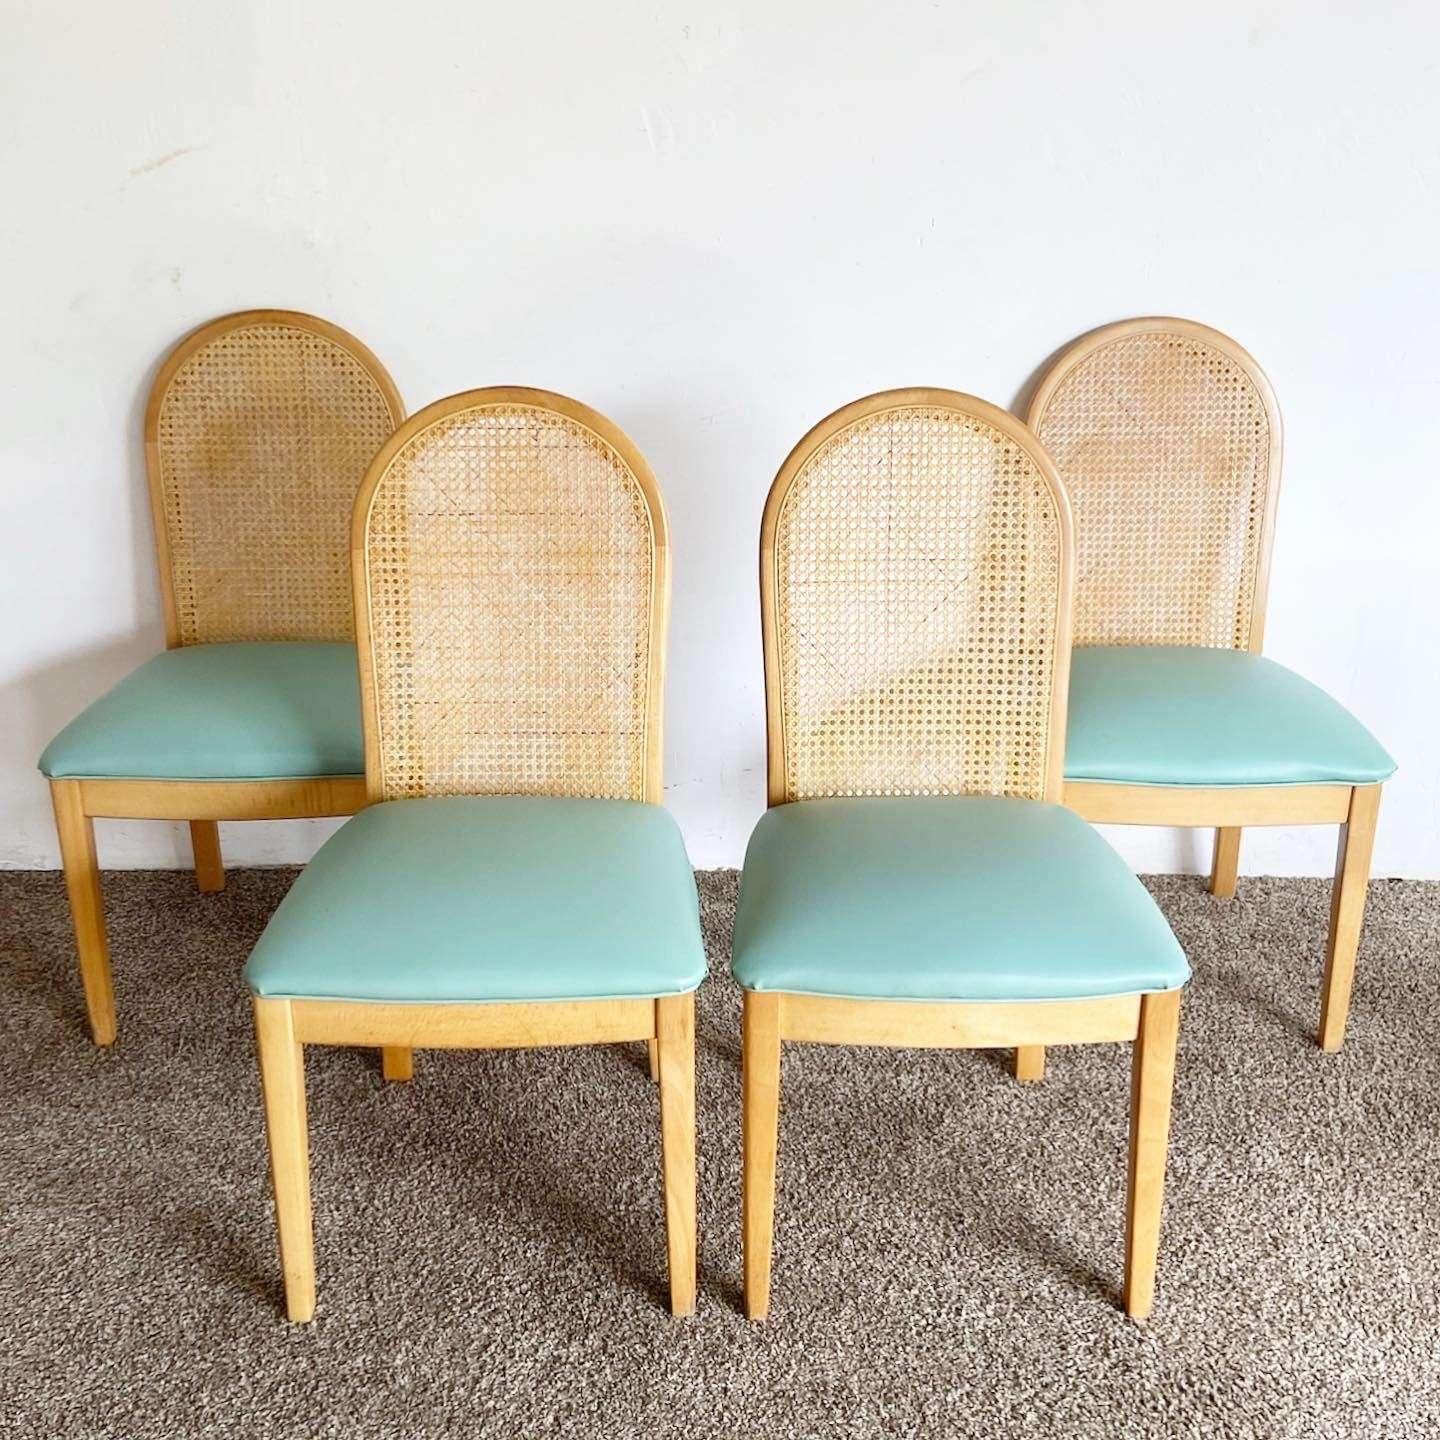 Exceptional set of 4 vintage boho chic dining chairs. Each feature a cane backrest with tufted blue vinyl.
